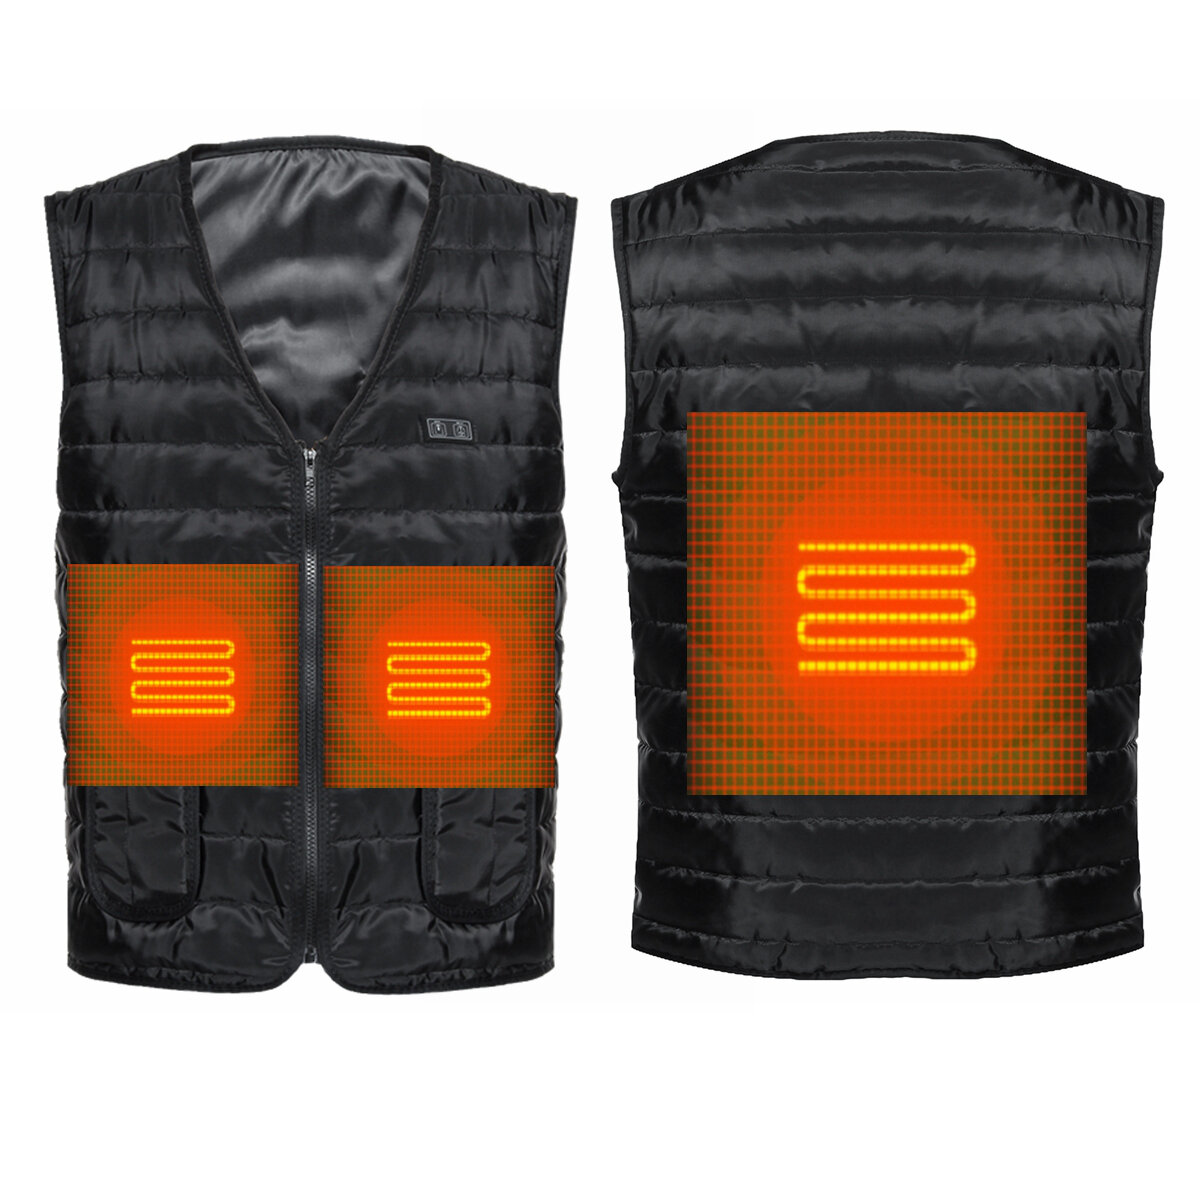 best price,dual,cotton,heated,electric,gear,usb,vest,discount